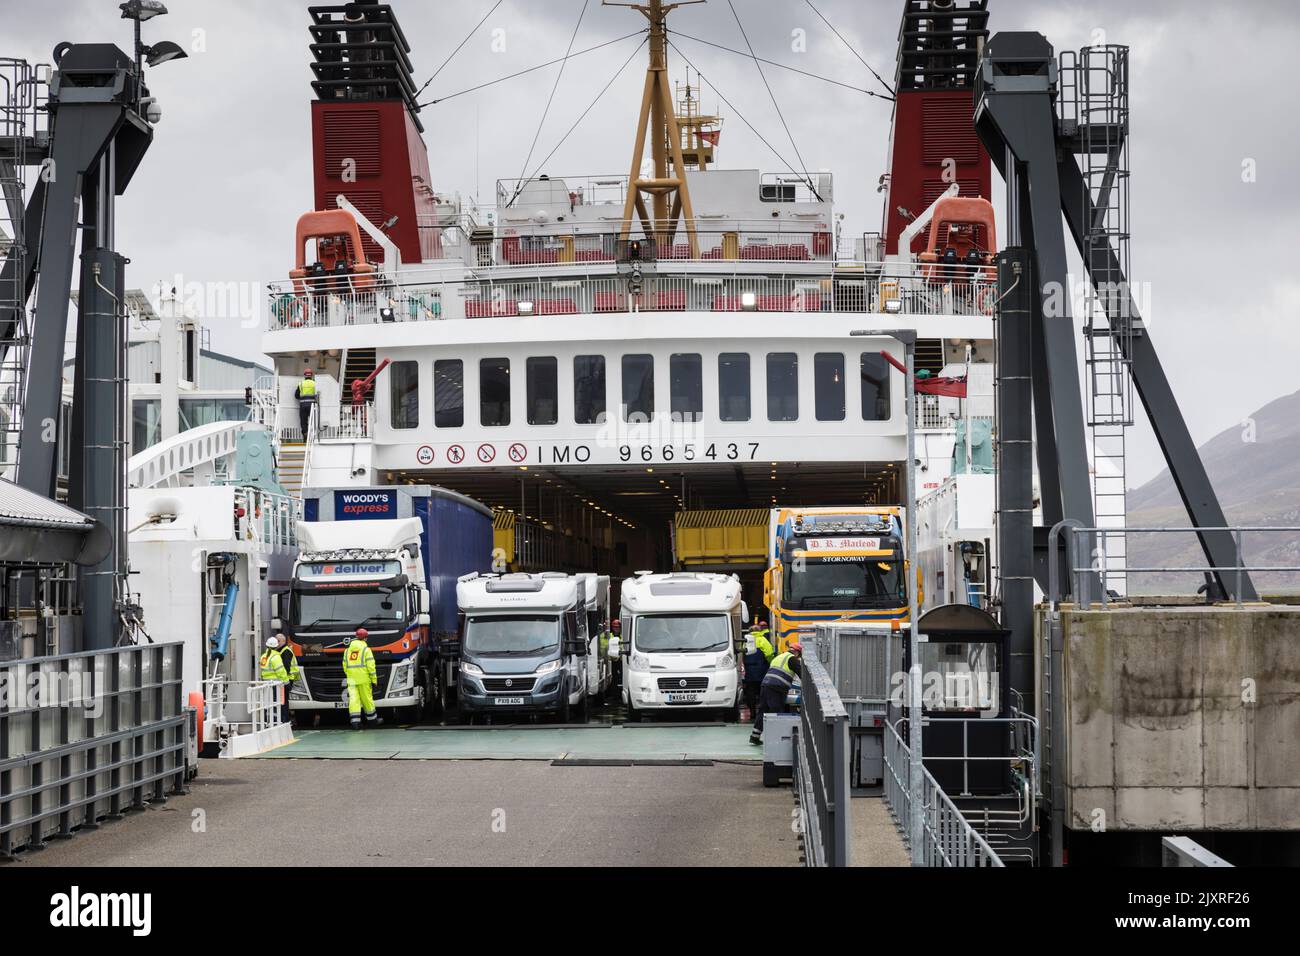 Campervans and lorries prepare to disembark from a CalMac ferry at ullapool harbour, Scotland. Stock Photo